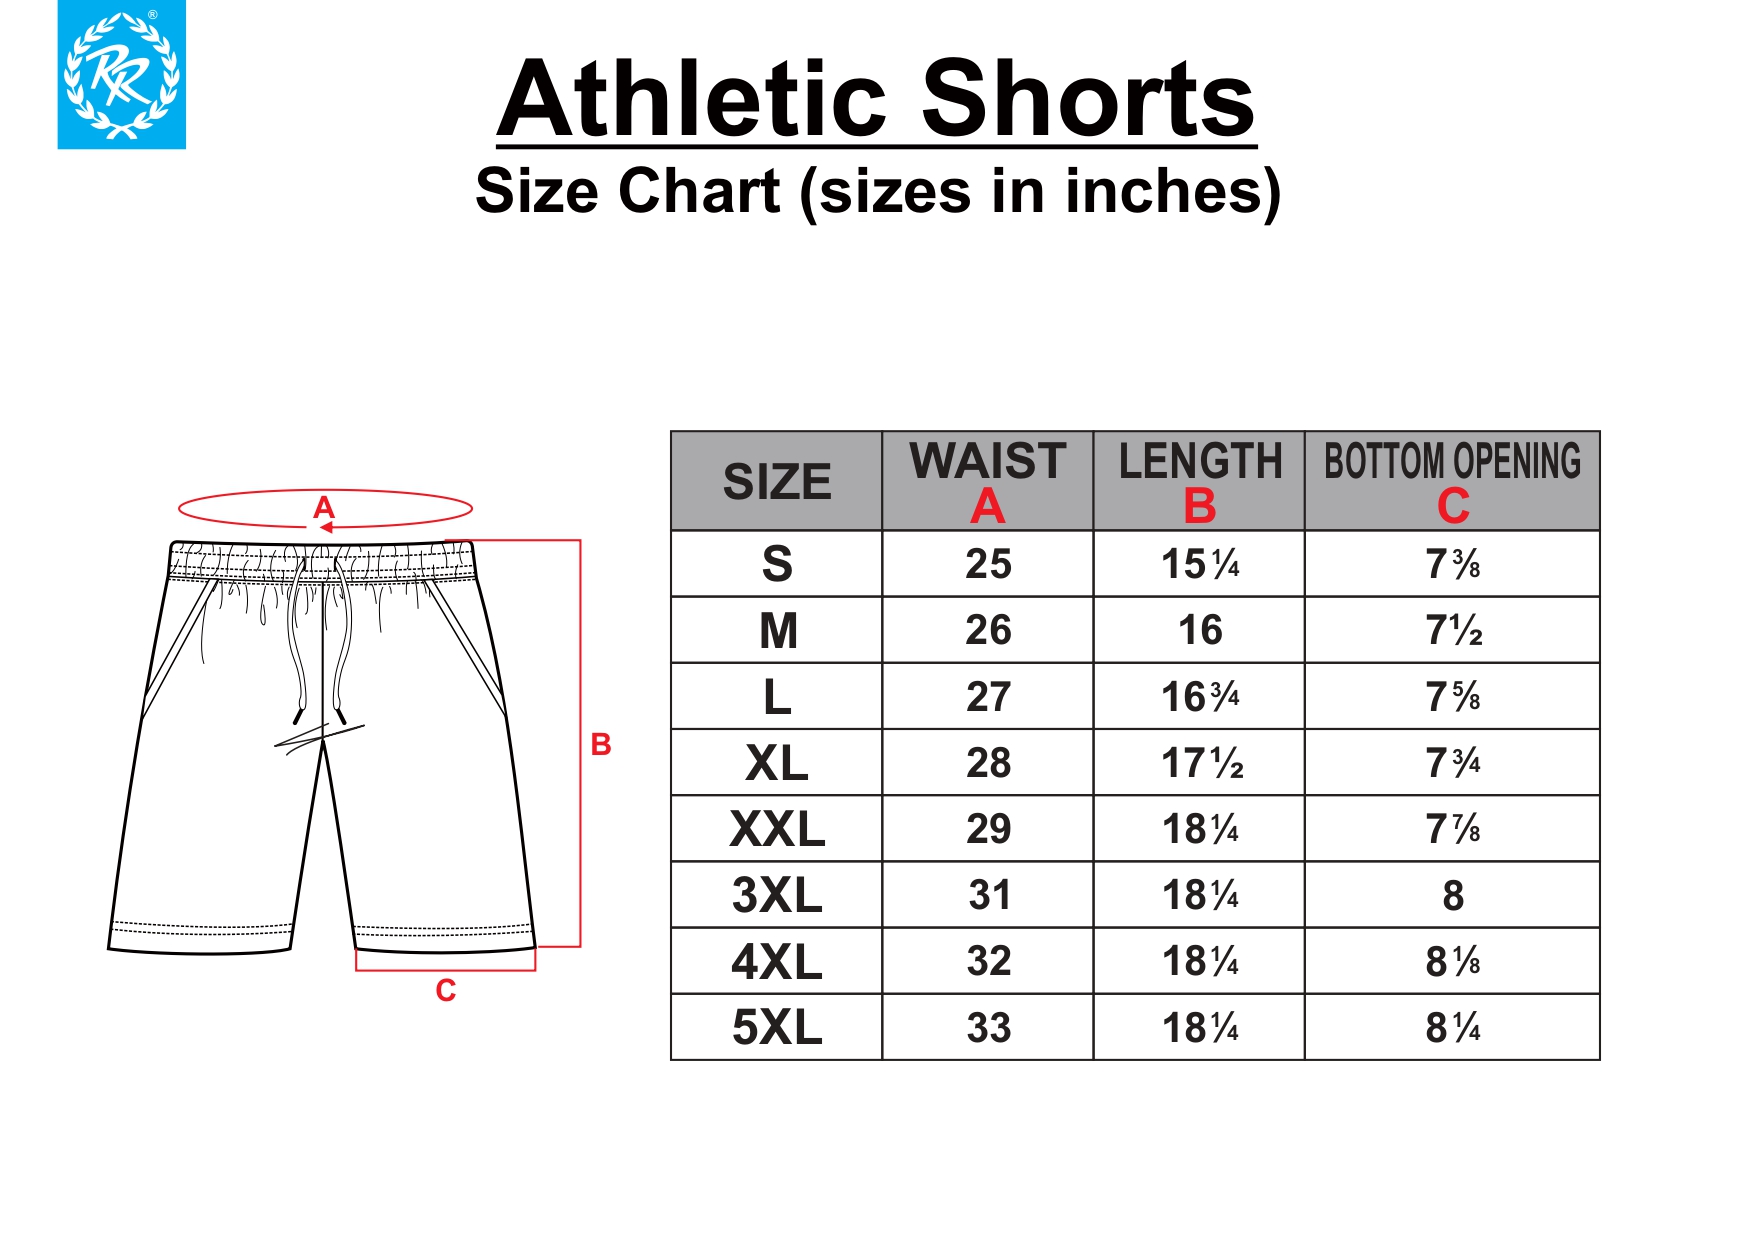 Men's Shorts Sizing Guide